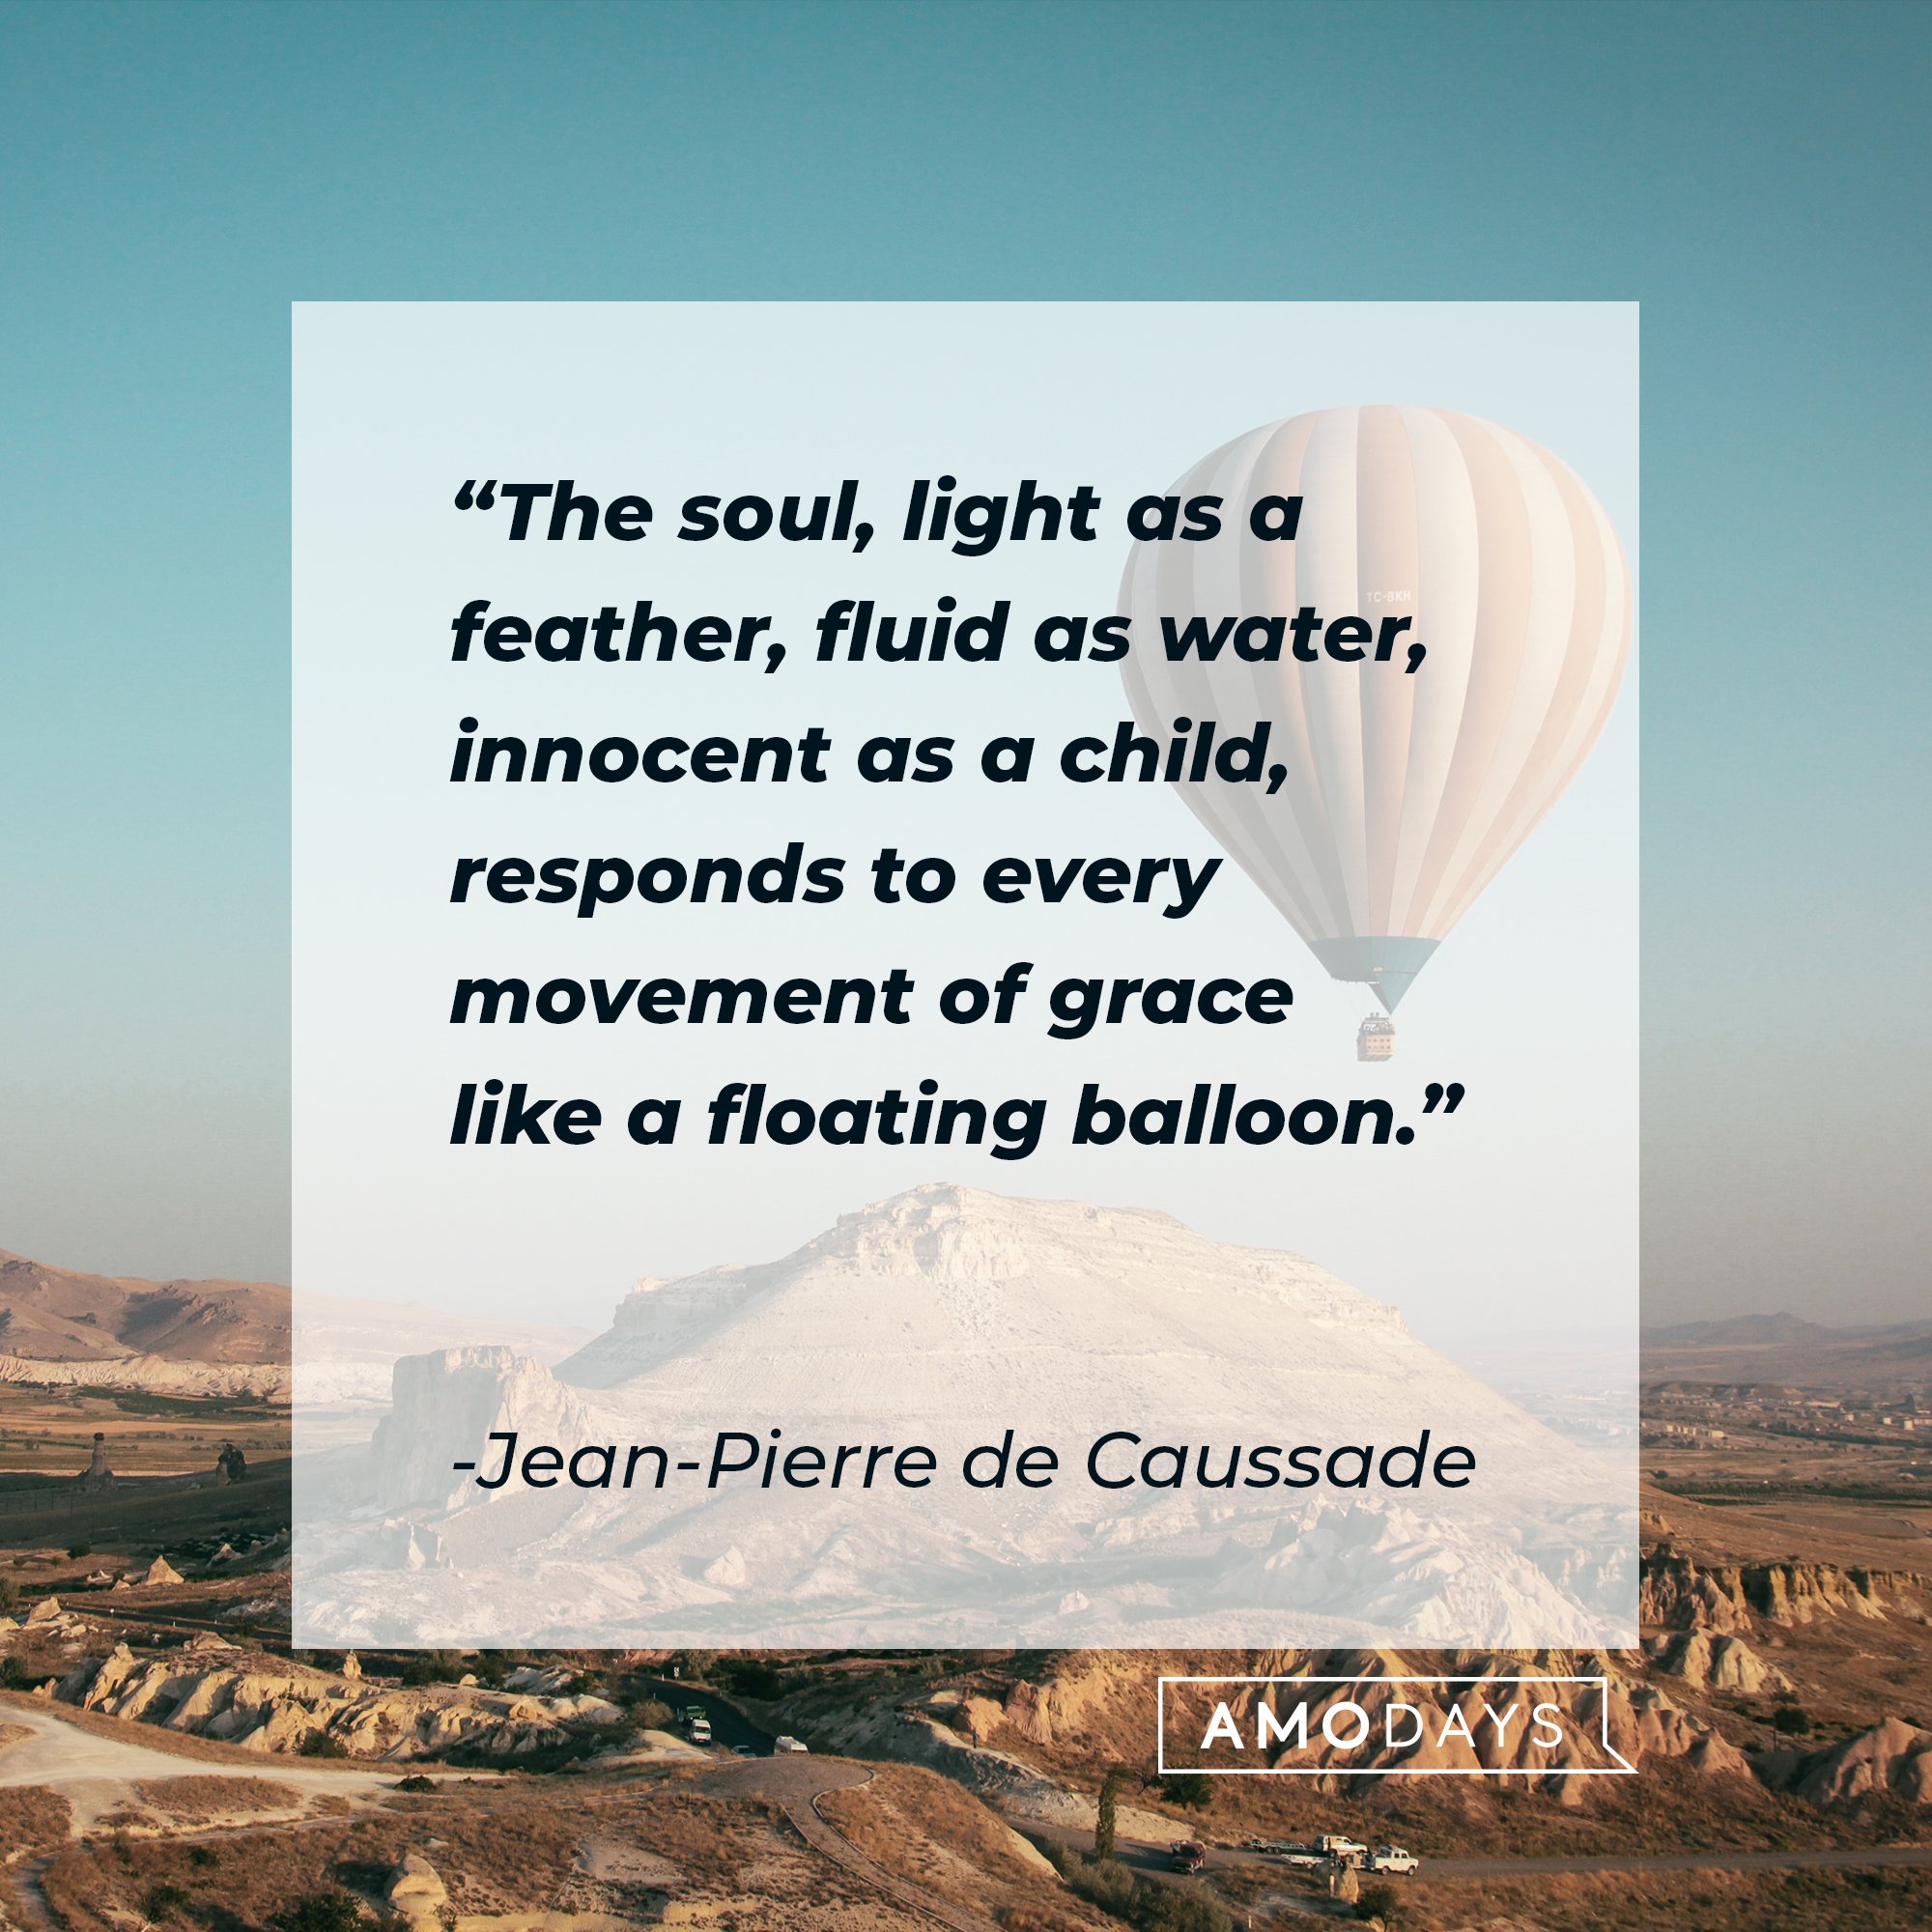 Jean-Pierre de Caussade’s quote: "The soul, light as a feather, fluid as water, innocent as a child, responds to every movement of grace like a floating balloon."  | Image: AmoDays